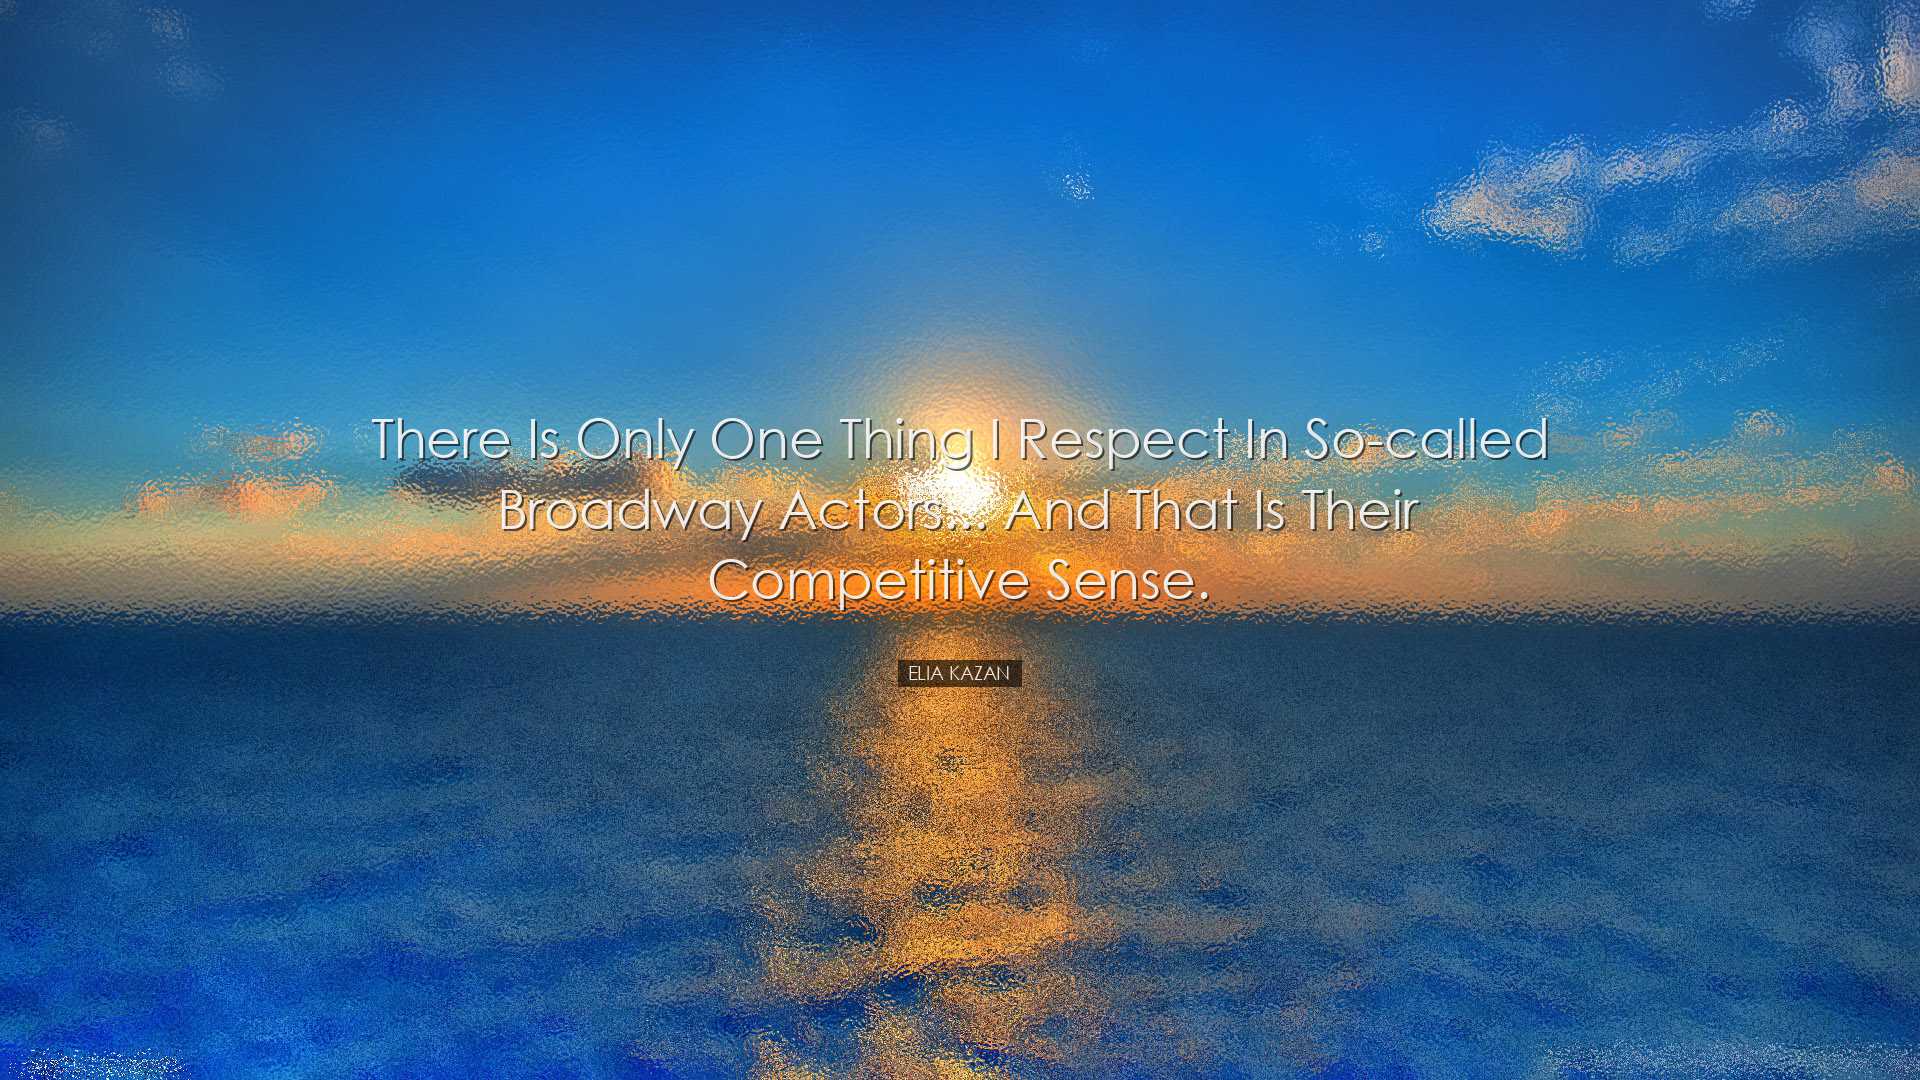 There is only one thing I respect in so-called Broadway actors...